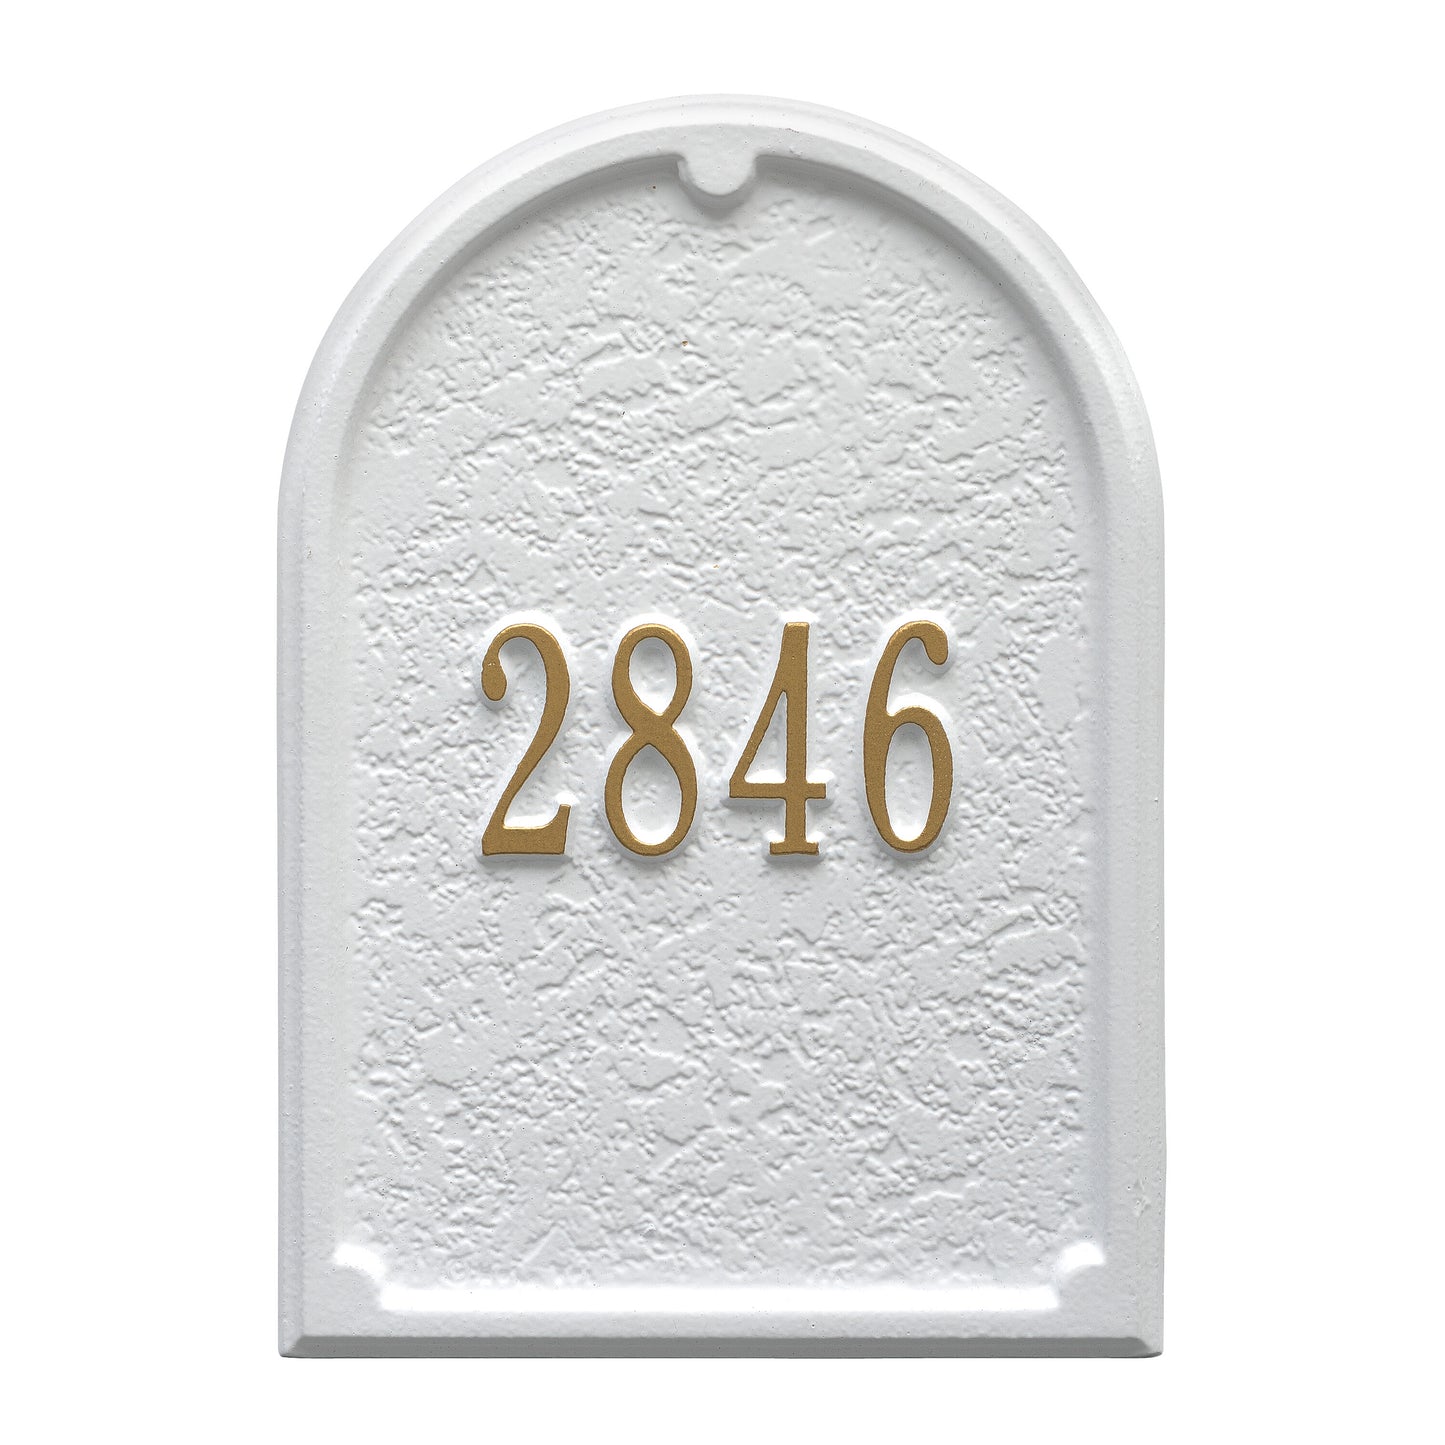 Whitehall Products Personalized Mailbox Door Personalized Door Plaque Black/gold